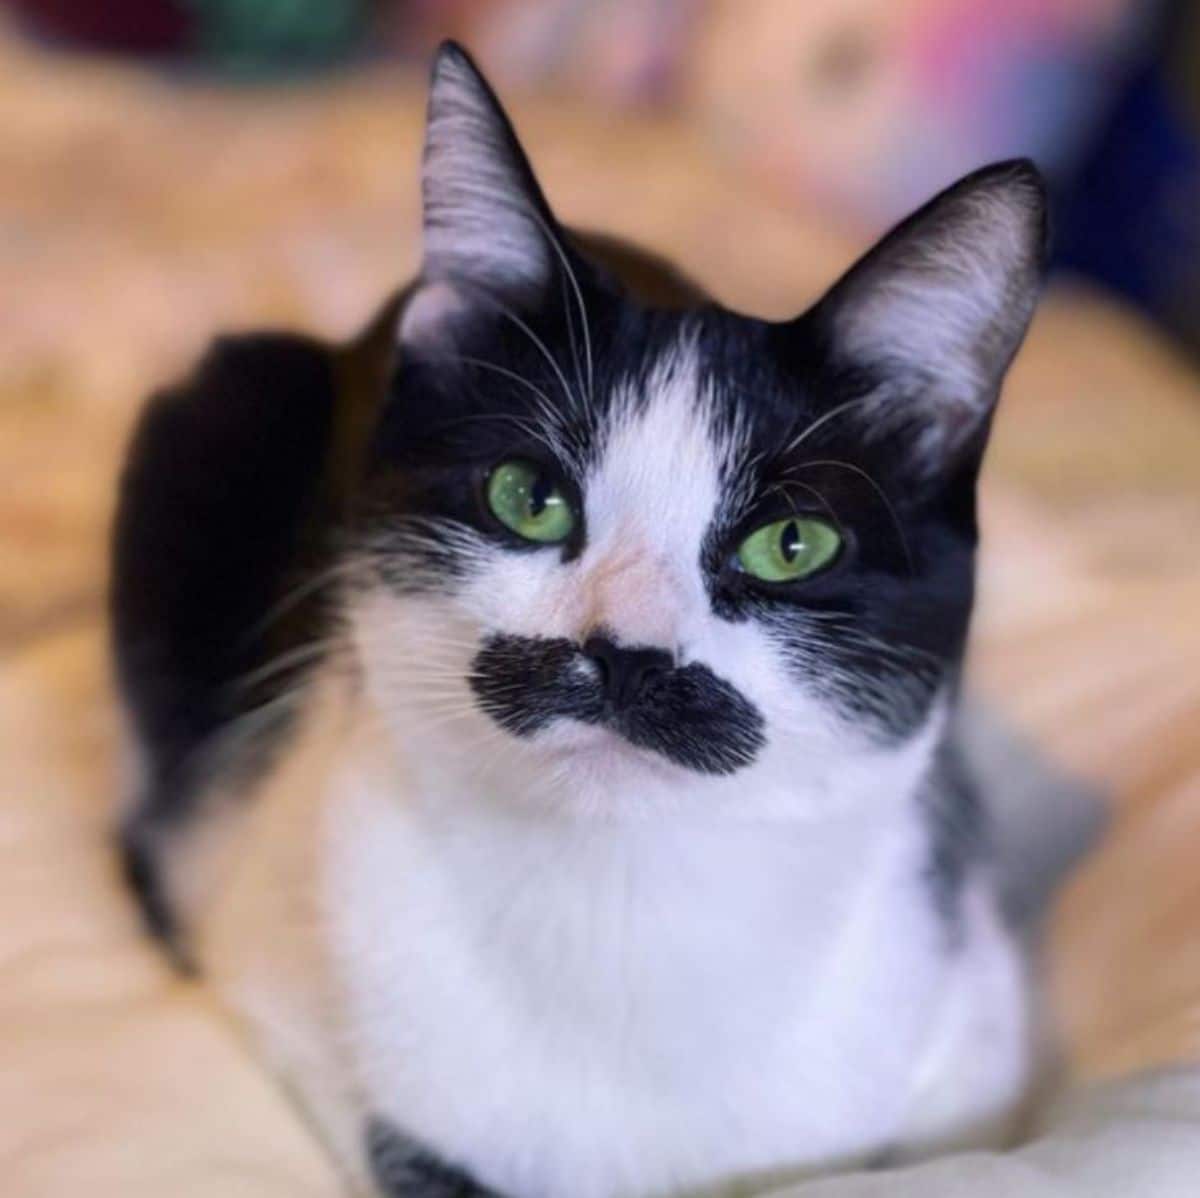 black and white cat with a black moustache sitting like a loaf on a white bed